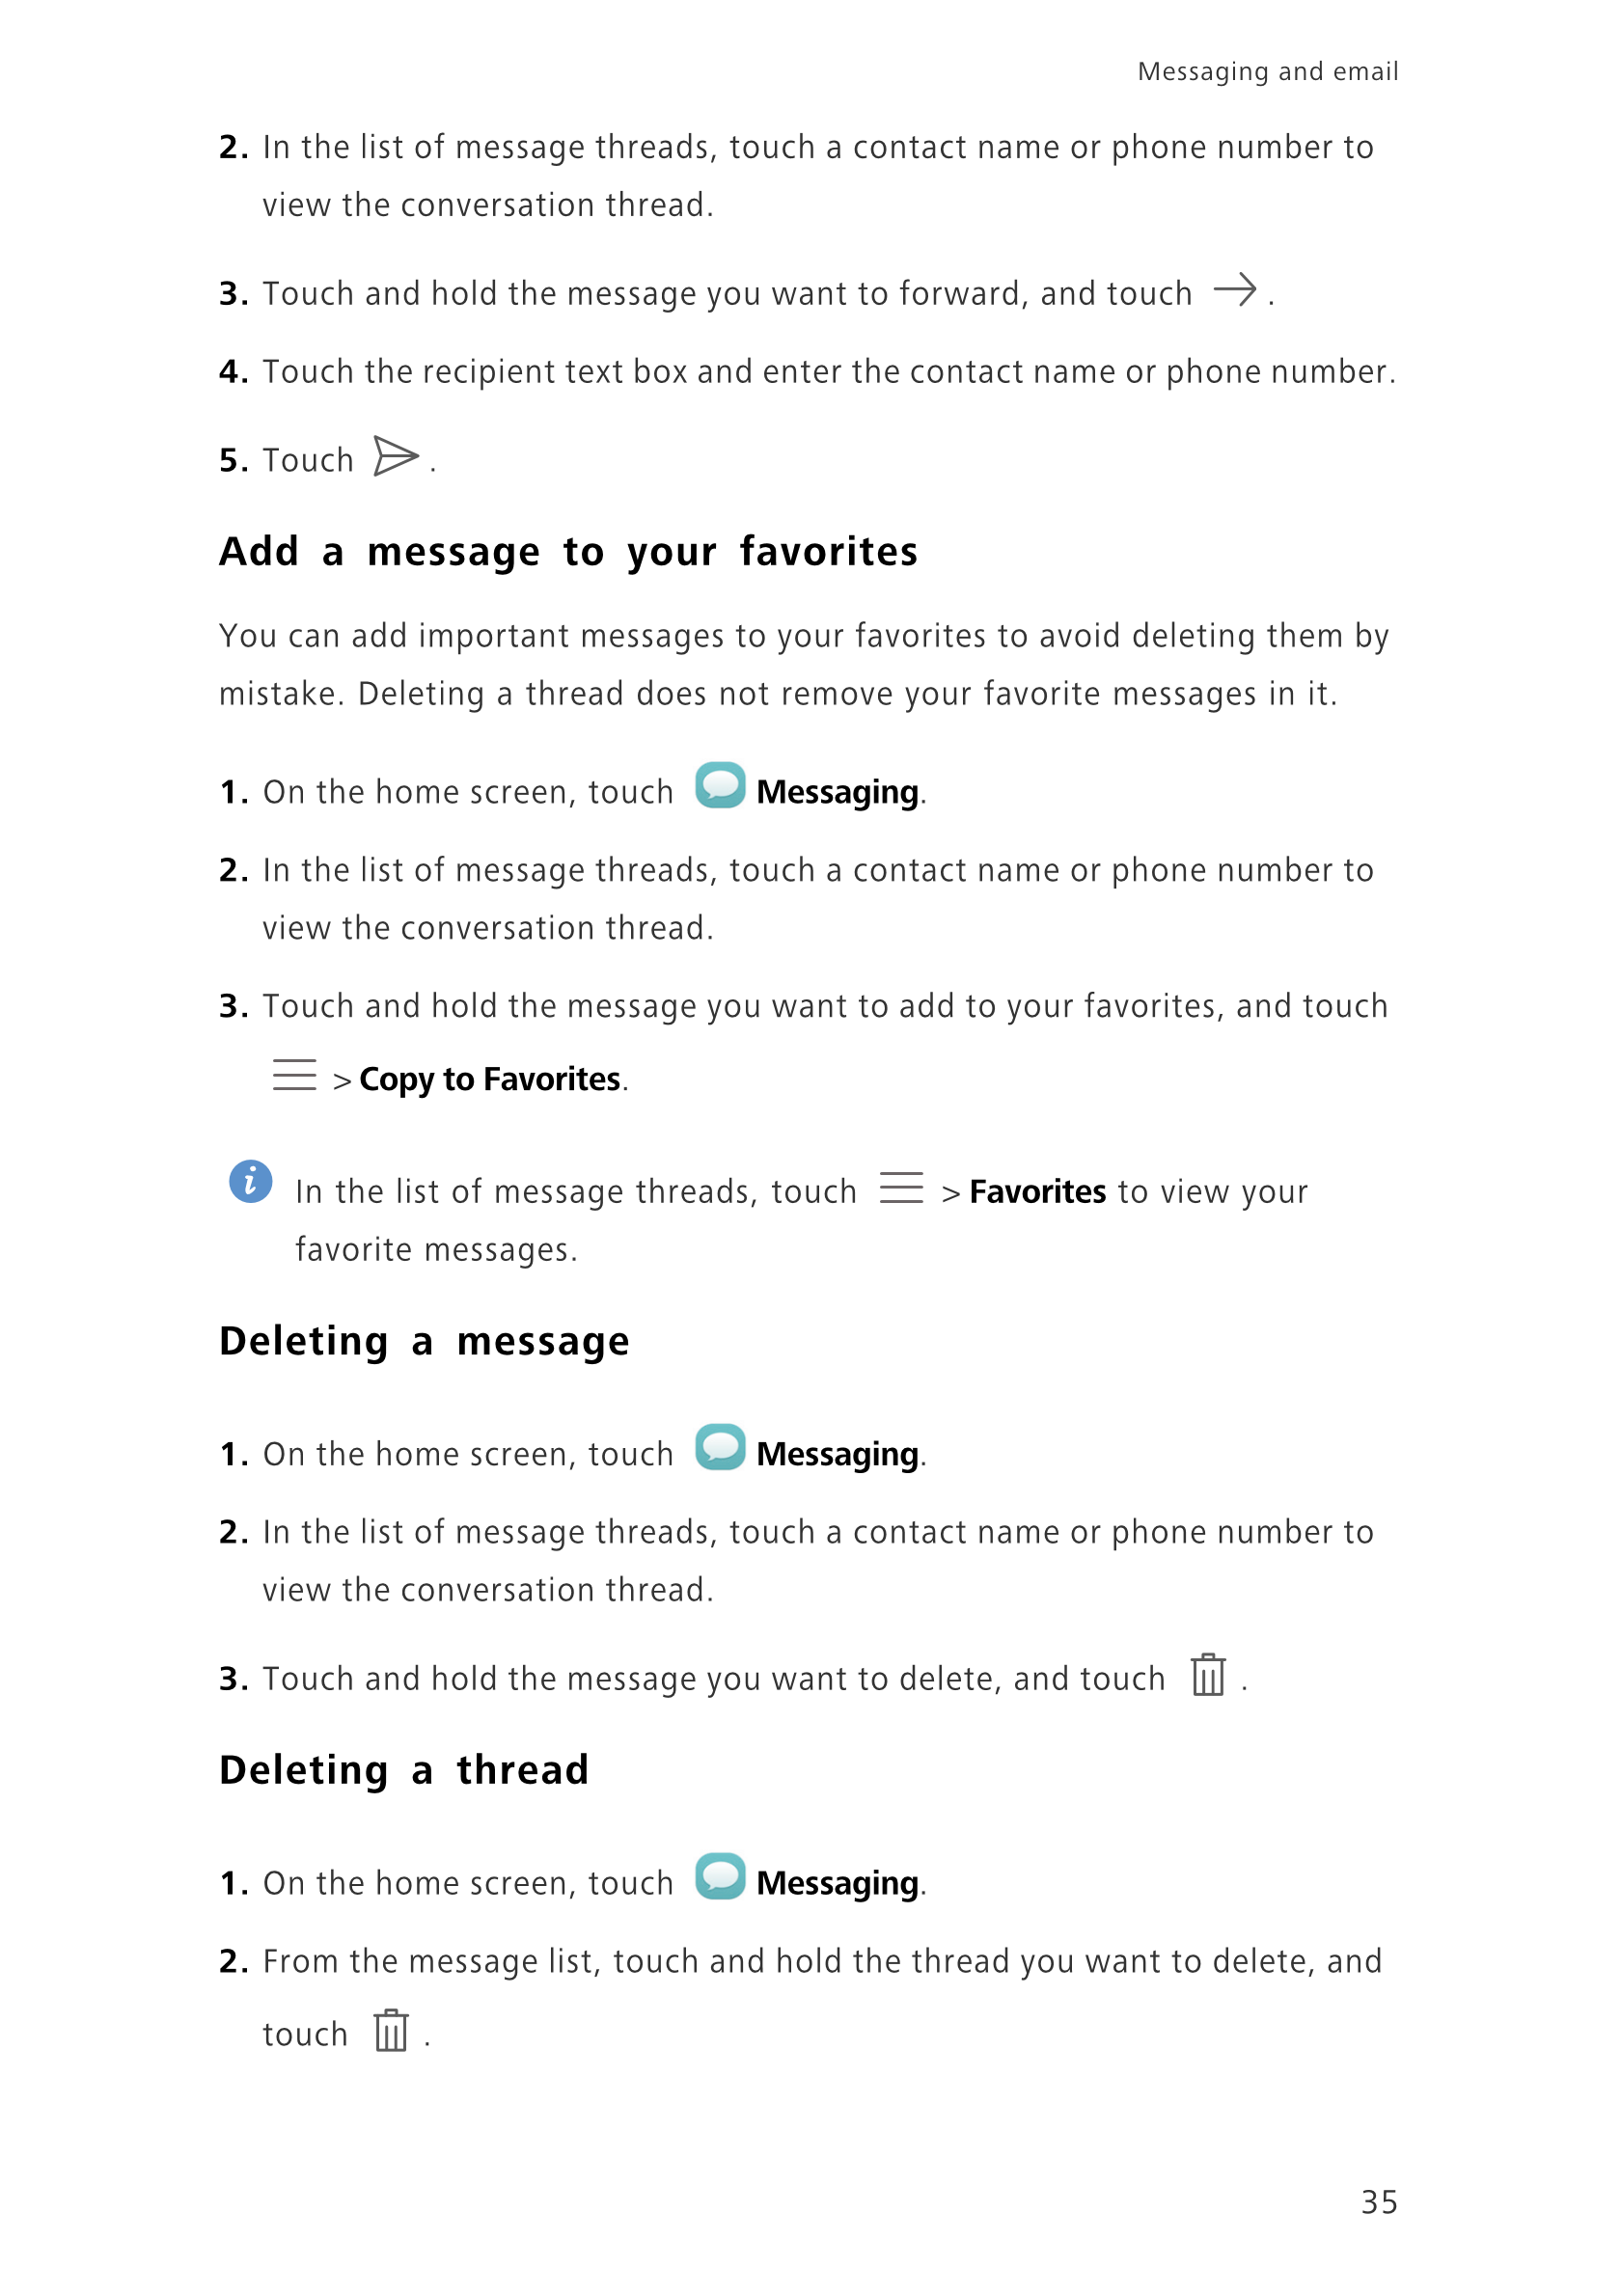 Messaging and email  
2.  In the list of message threads, touch a contact name or phone number to 
view the conversation thread.